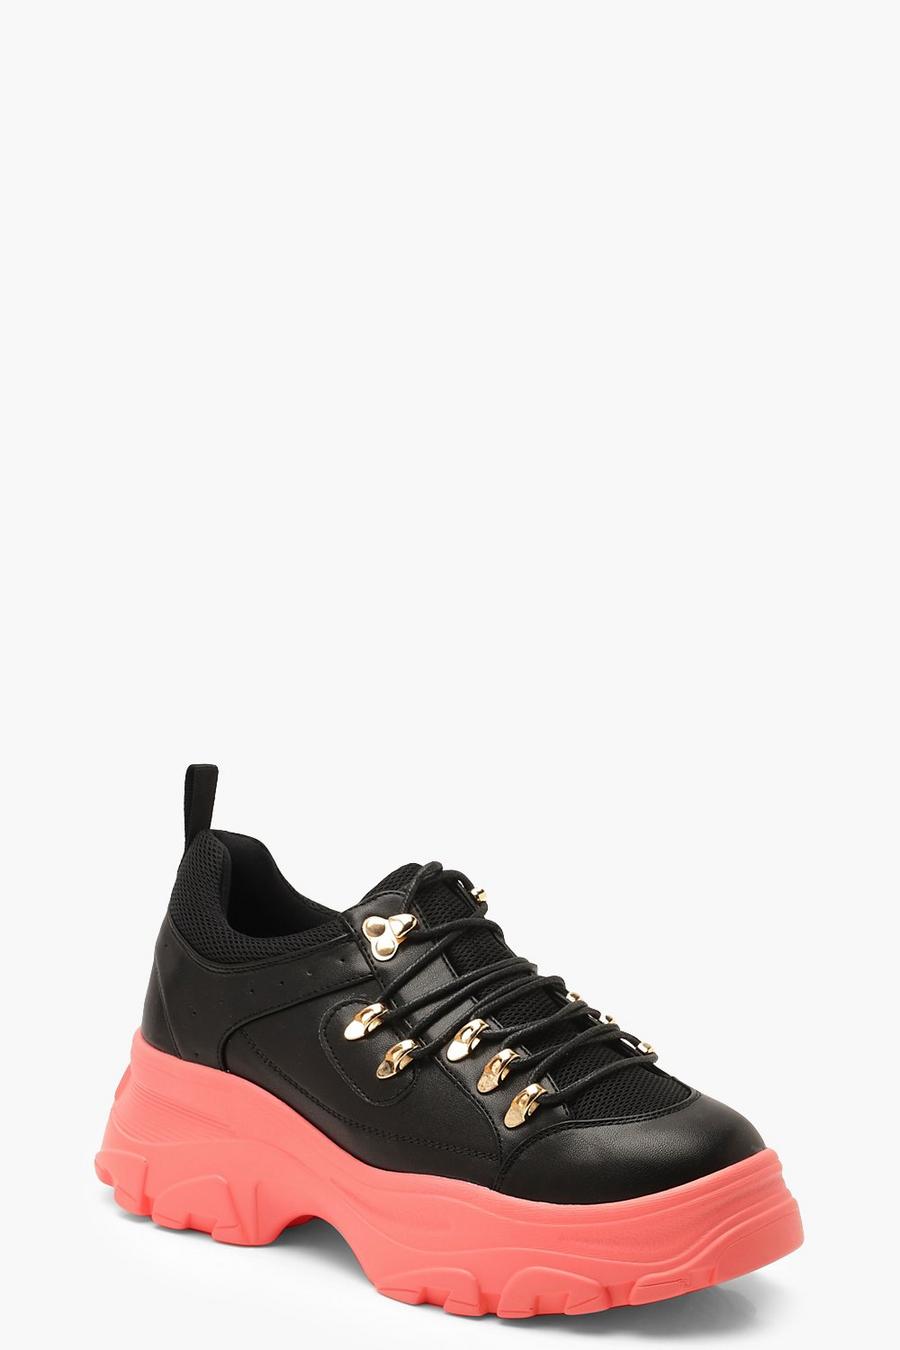 Contrast Sole Lace Up Chunky Hiker Sneakers image number 1